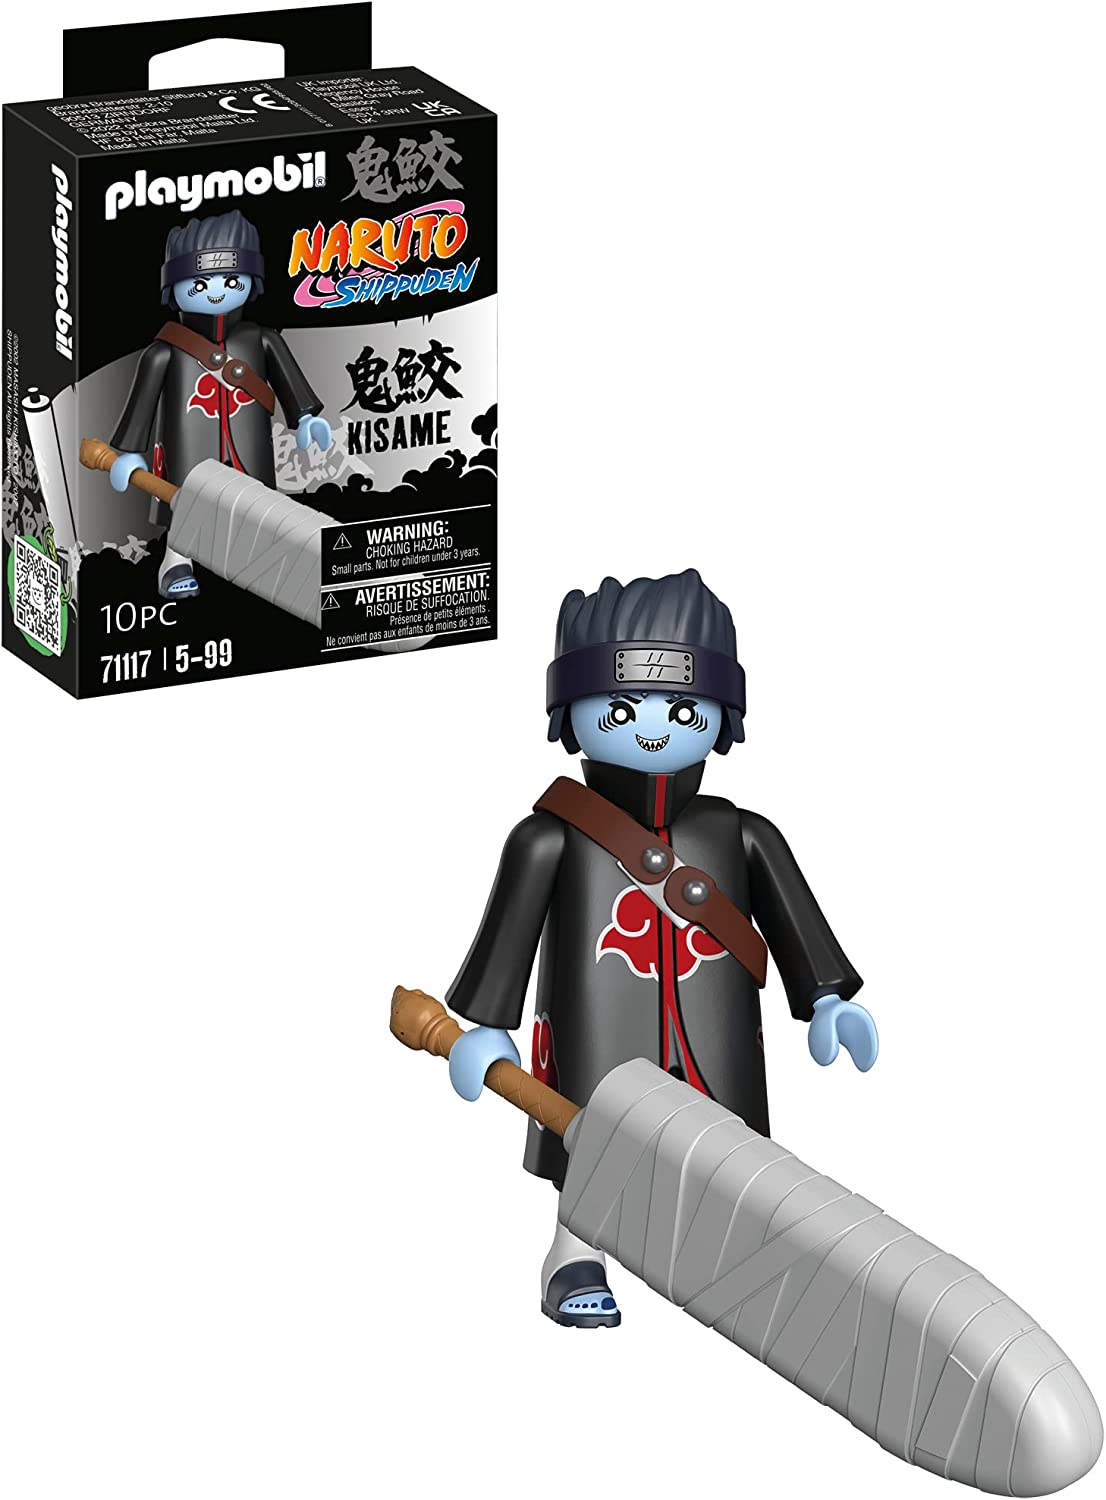 Playmobil Naruto Shippuden 71117 Kisame with Samhada Sword and Carry Strap, Creative Fun for Anime Fans With Great Details and Authentic Extras, 10 Pieces, From 5 Years